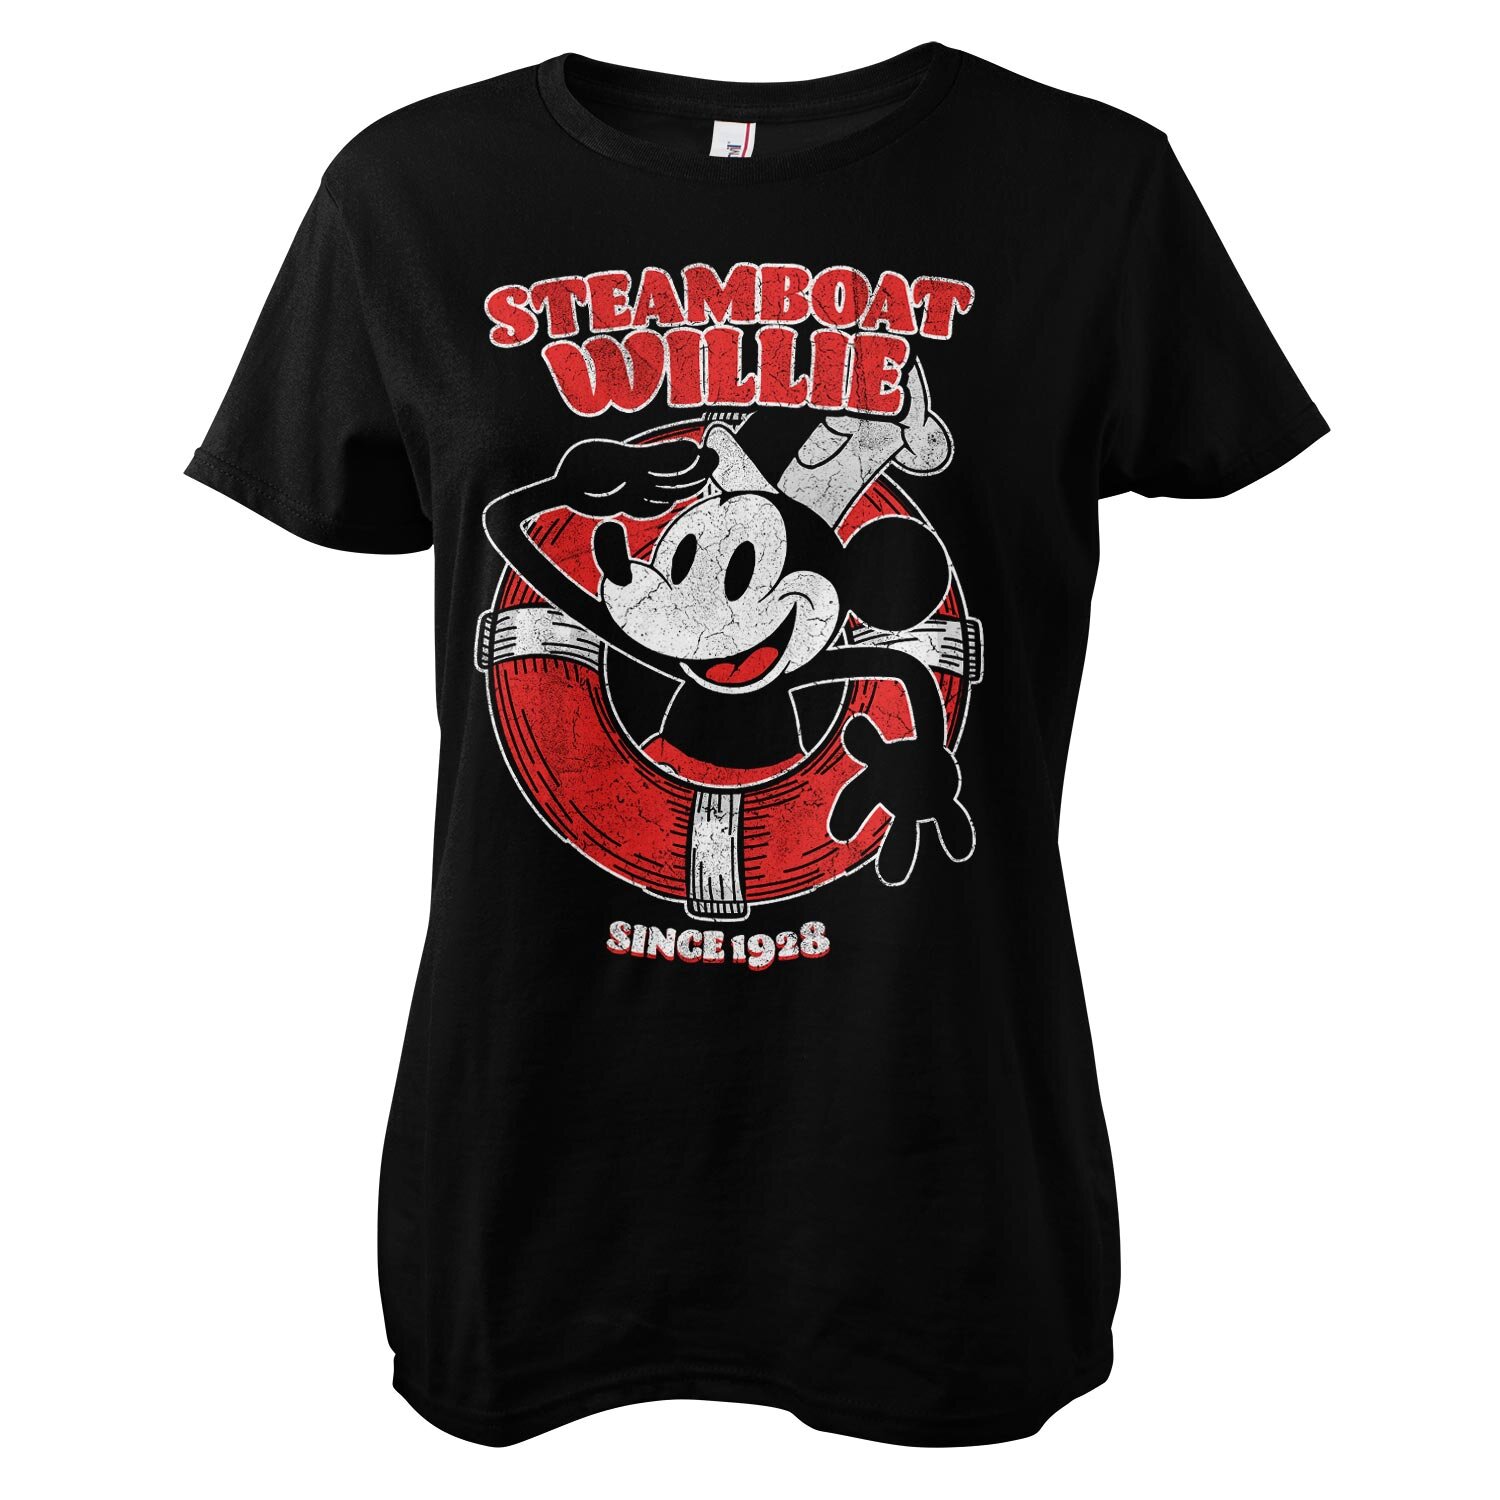 Steamboat Willie Since 1928 Girly Tee